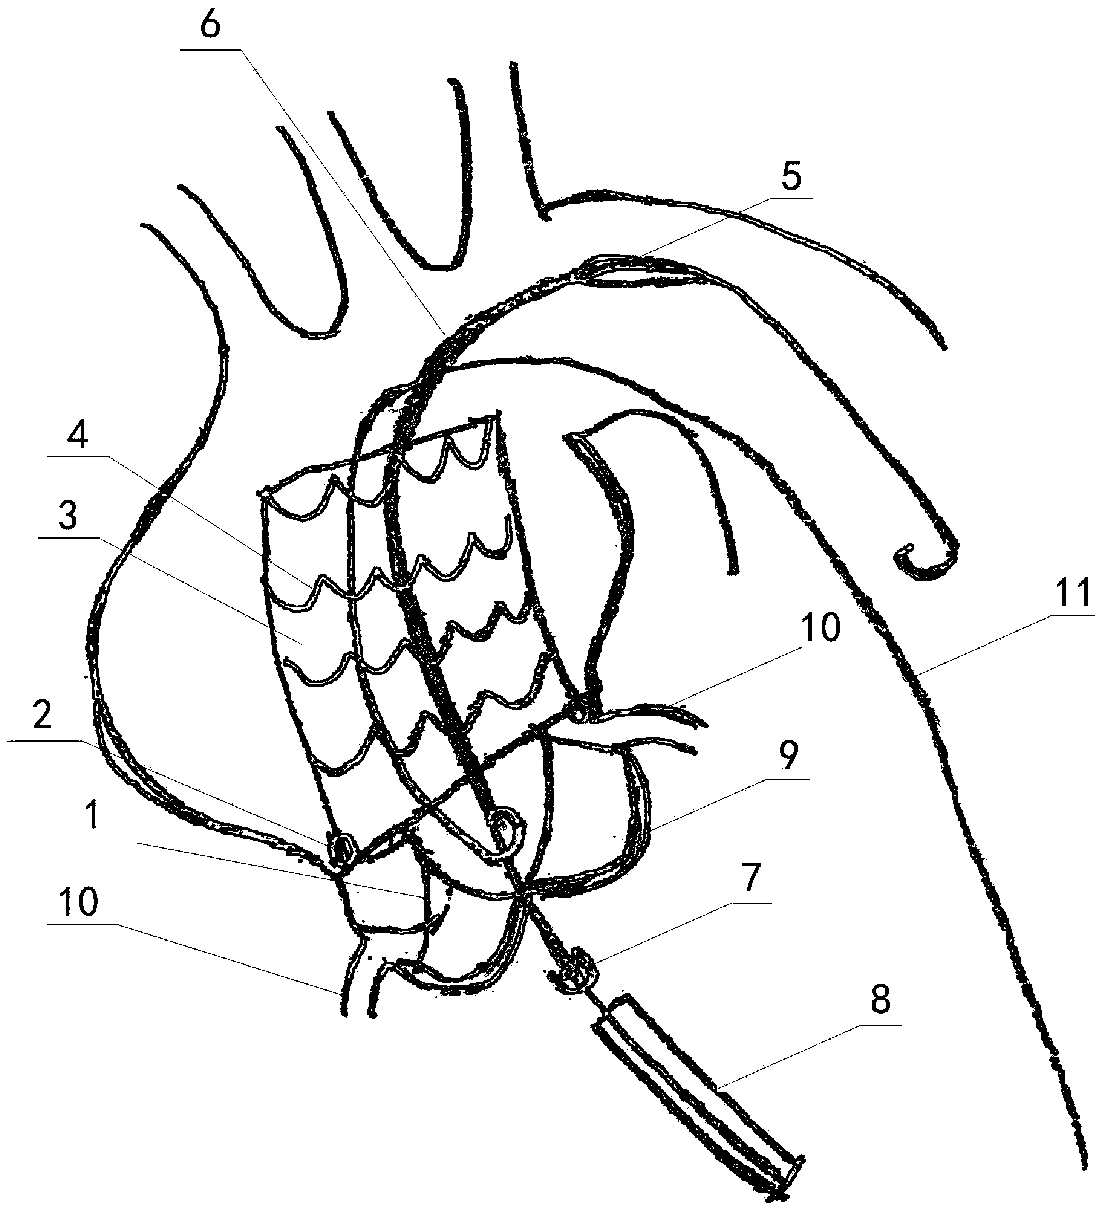 Ascending aorta covered stent released by transapical approach